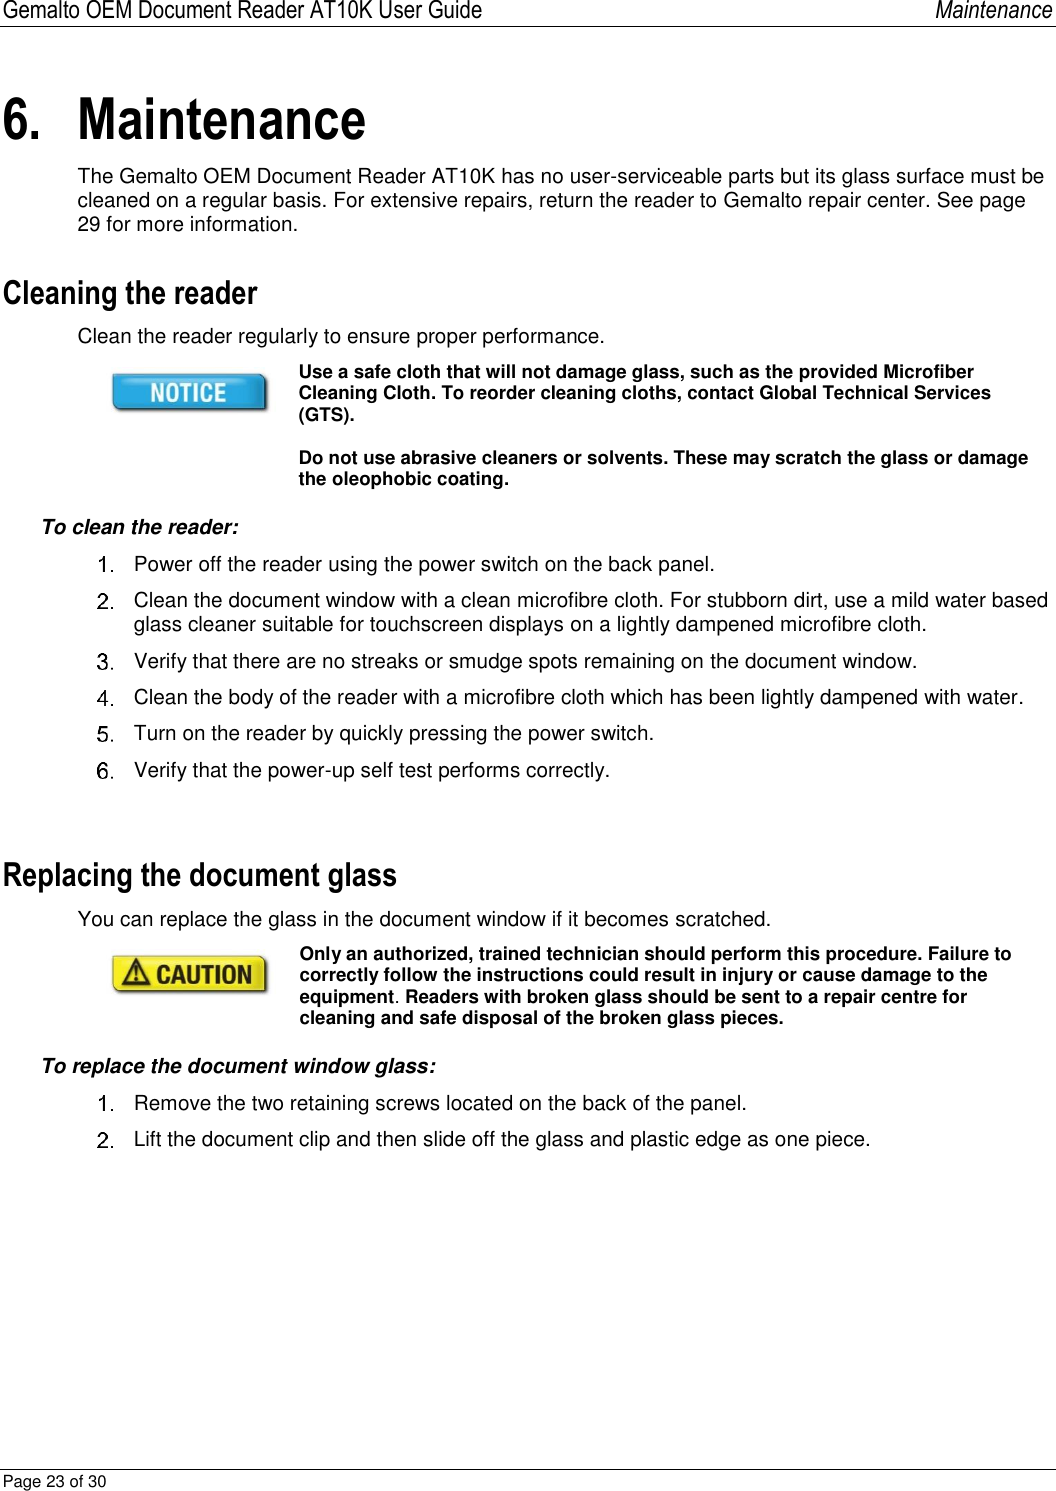 Gemalto OEM Document Reader AT10K User Guide   Maintenance Page 23 of 30  6. Maintenance The Gemalto OEM Document Reader AT10K has no user-serviceable parts but its glass surface must be cleaned on a regular basis. For extensive repairs, return the reader to Gemalto repair center. See page 29 for more information. Cleaning the reader Clean the reader regularly to ensure proper performance.  Use a safe cloth that will not damage glass, such as the provided Microfiber Cleaning Cloth. To reorder cleaning cloths, contact Global Technical Services (GTS).   Do not use abrasive cleaners or solvents. These may scratch the glass or damage the oleophobic coating. To clean the reader:   Power off the reader using the power switch on the back panel.   Clean the document window with a clean microfibre cloth. For stubborn dirt, use a mild water based glass cleaner suitable for touchscreen displays on a lightly dampened microfibre cloth.    Verify that there are no streaks or smudge spots remaining on the document window.   Clean the body of the reader with a microfibre cloth which has been lightly dampened with water.   Turn on the reader by quickly pressing the power switch.   Verify that the power-up self test performs correctly.  Replacing the document glass You can replace the glass in the document window if it becomes scratched.   Only an authorized, trained technician should perform this procedure. Failure to correctly follow the instructions could result in injury or cause damage to the equipment. Readers with broken glass should be sent to a repair centre for cleaning and safe disposal of the broken glass pieces. To replace the document window glass:   Remove the two retaining screws located on the back of the panel.   Lift the document clip and then slide off the glass and plastic edge as one piece.  